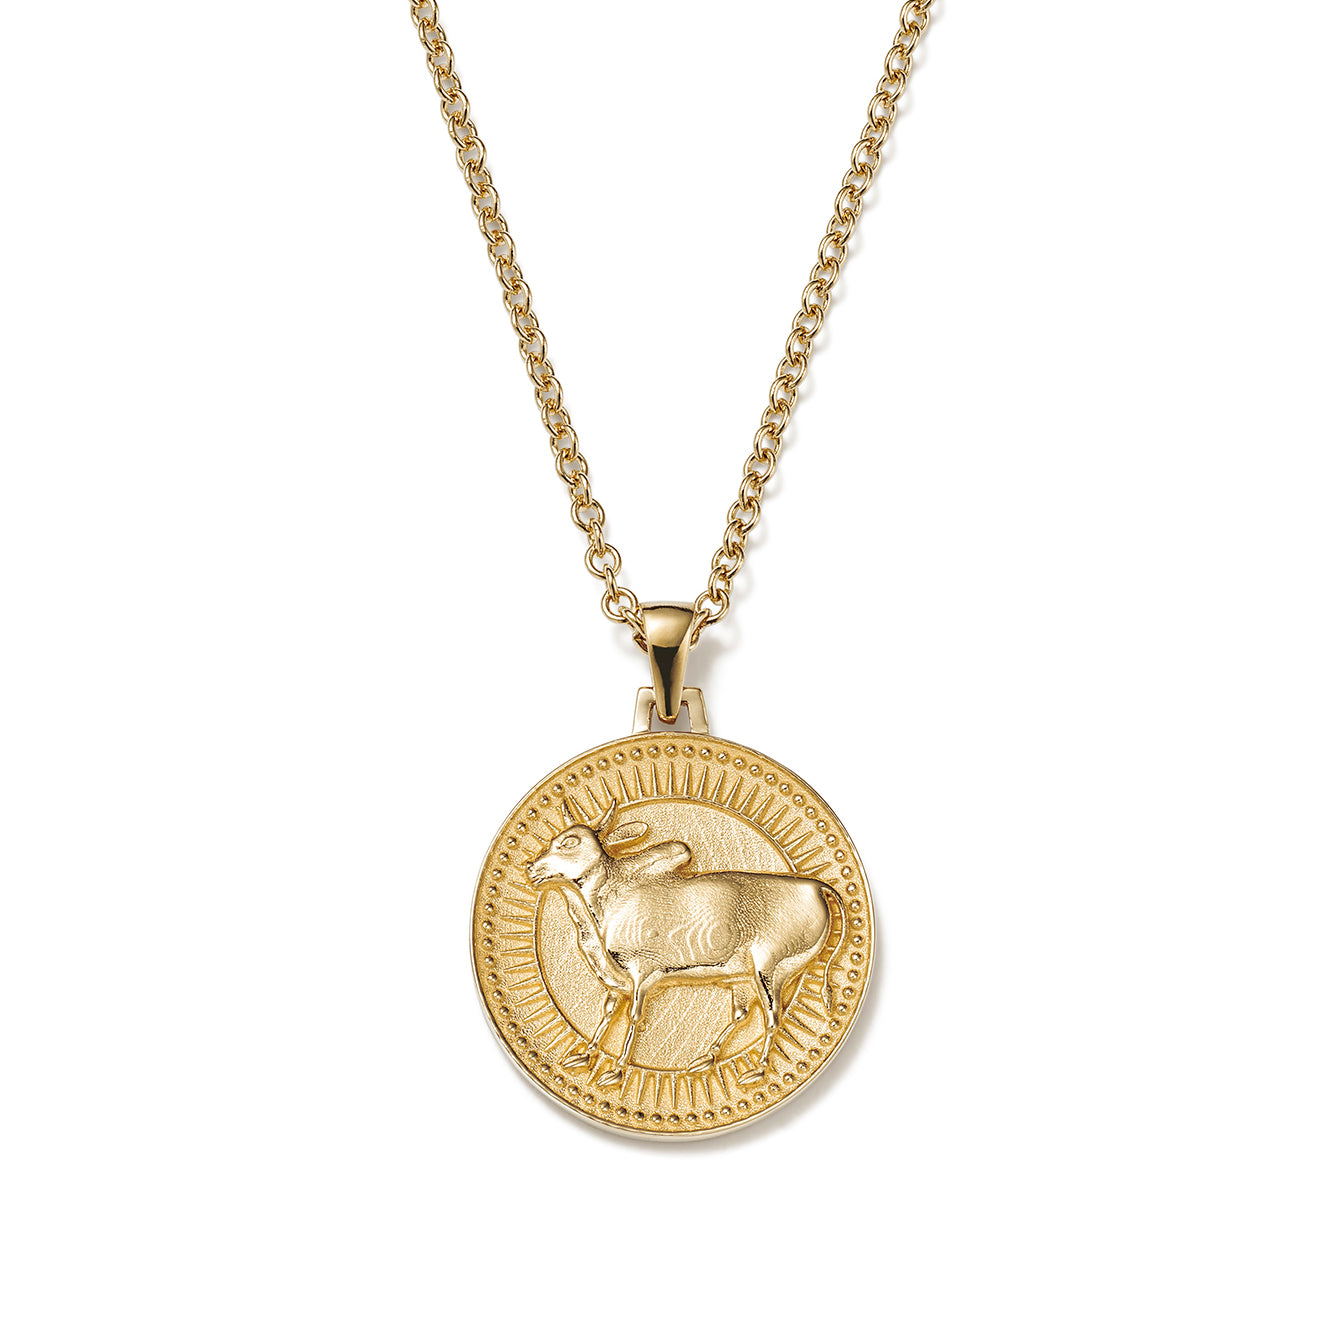 Gold and steel 14K Italy Taurus Zodiac Sign Pendant Necklace | eBay